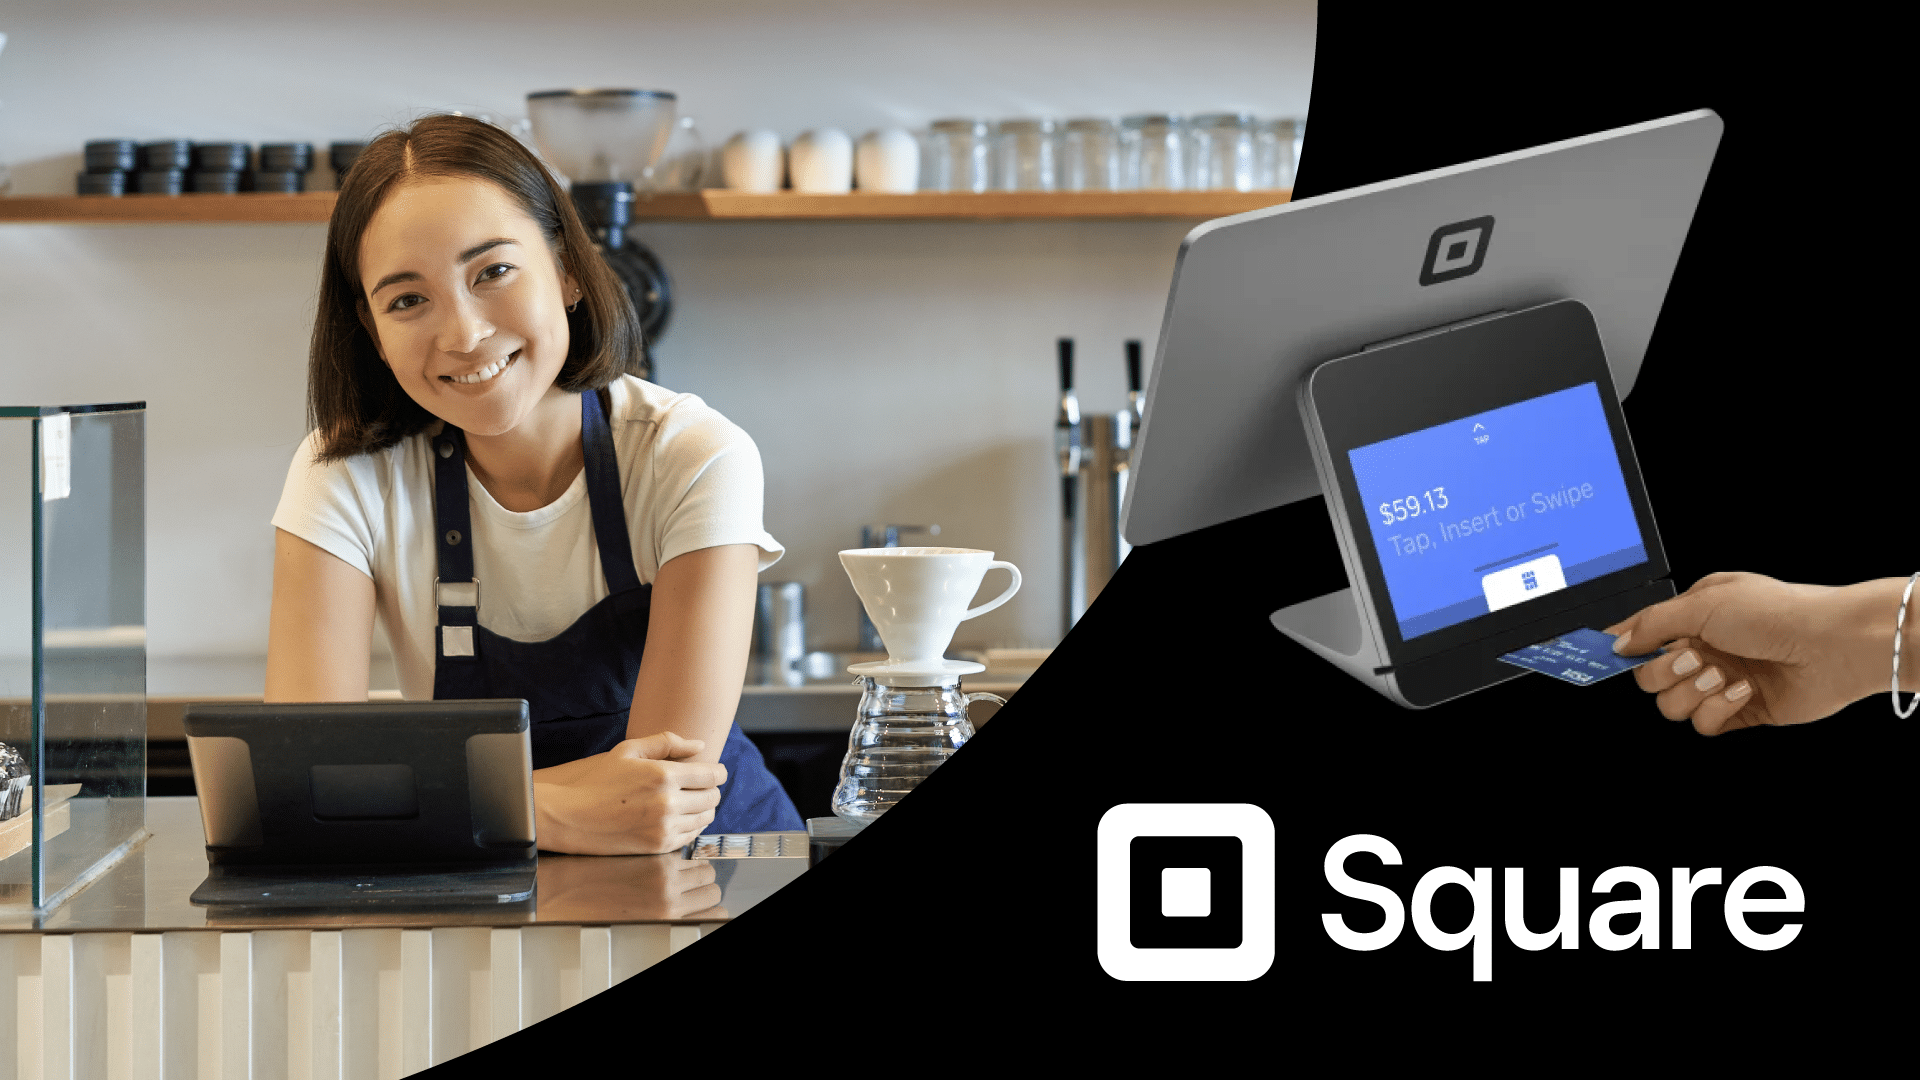 square pos featured image showing a coffee shop cashier on the left and a person using a credit card at a square terminal on the right